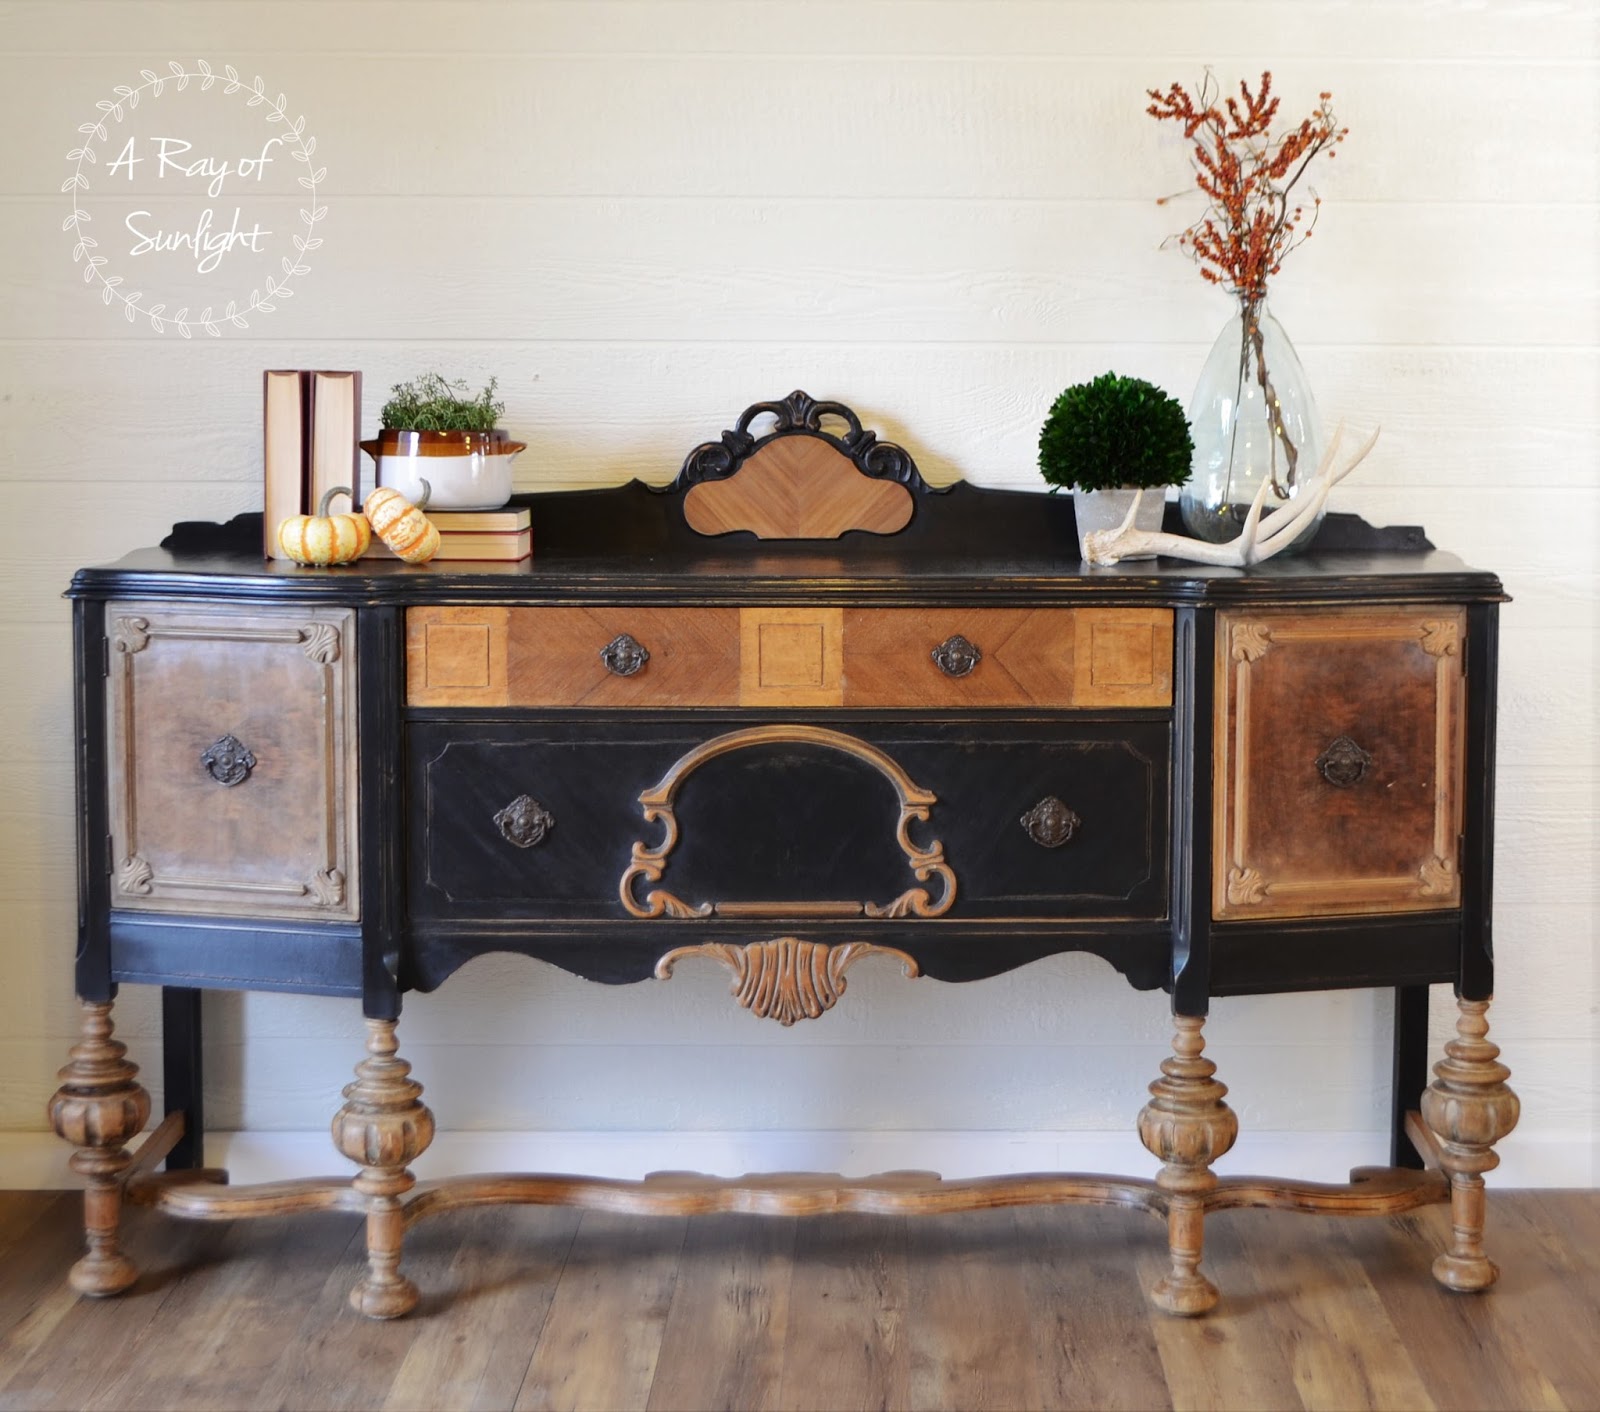 How To Fix Damaged Veneer For Paint The Victorian Buffet In Black